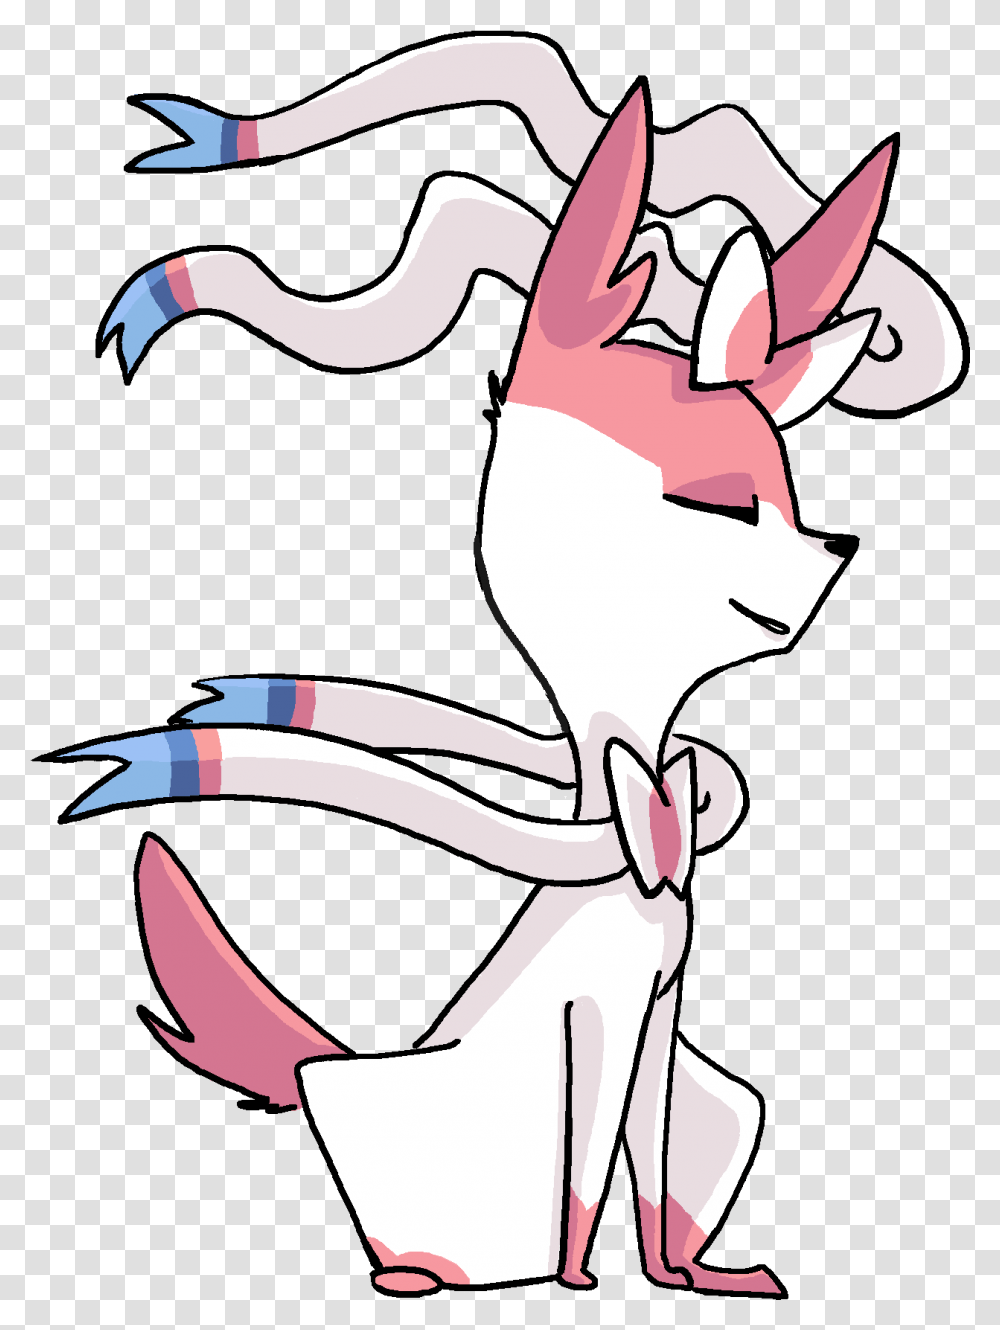 Clip Stock Sylveon At Getdrawings Com Free For Personal Cartoon, Performer Transparent Png